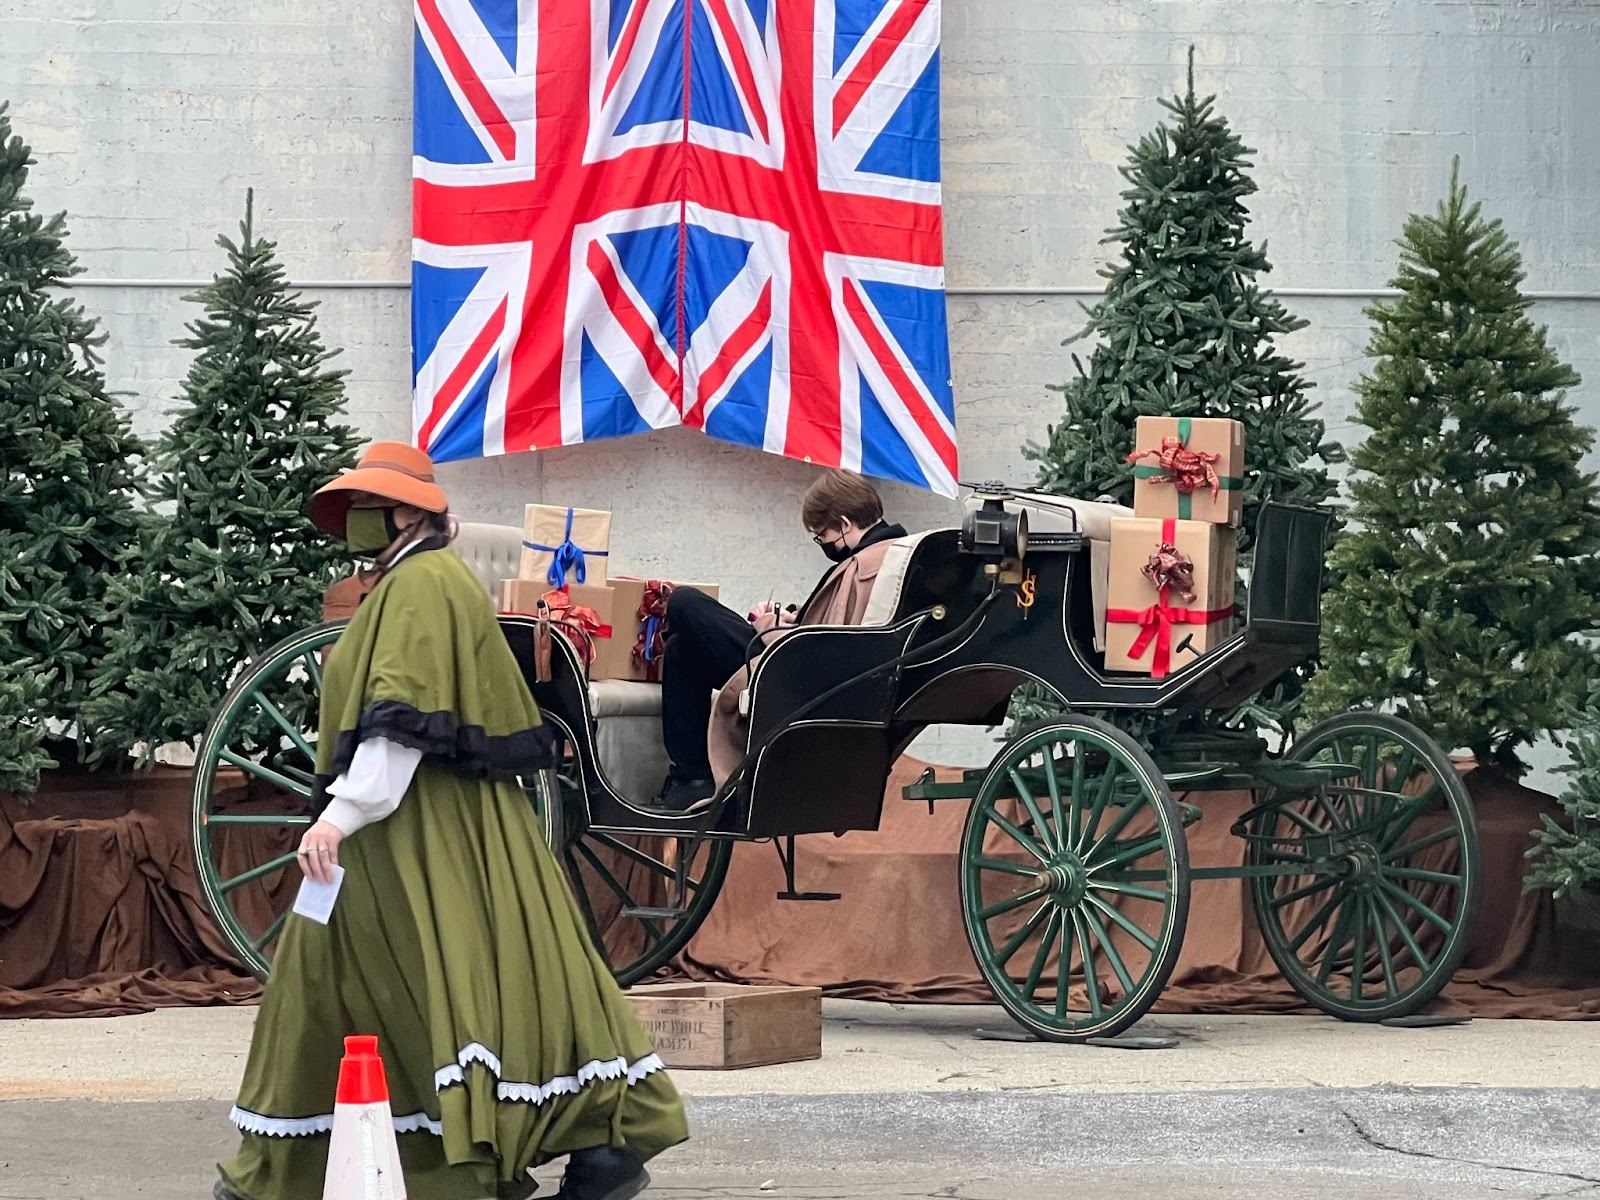 A woman dressed in 19th century British clothing walks in the foreground as a British flag, horse drawn carriage and Christmas trees line the background.